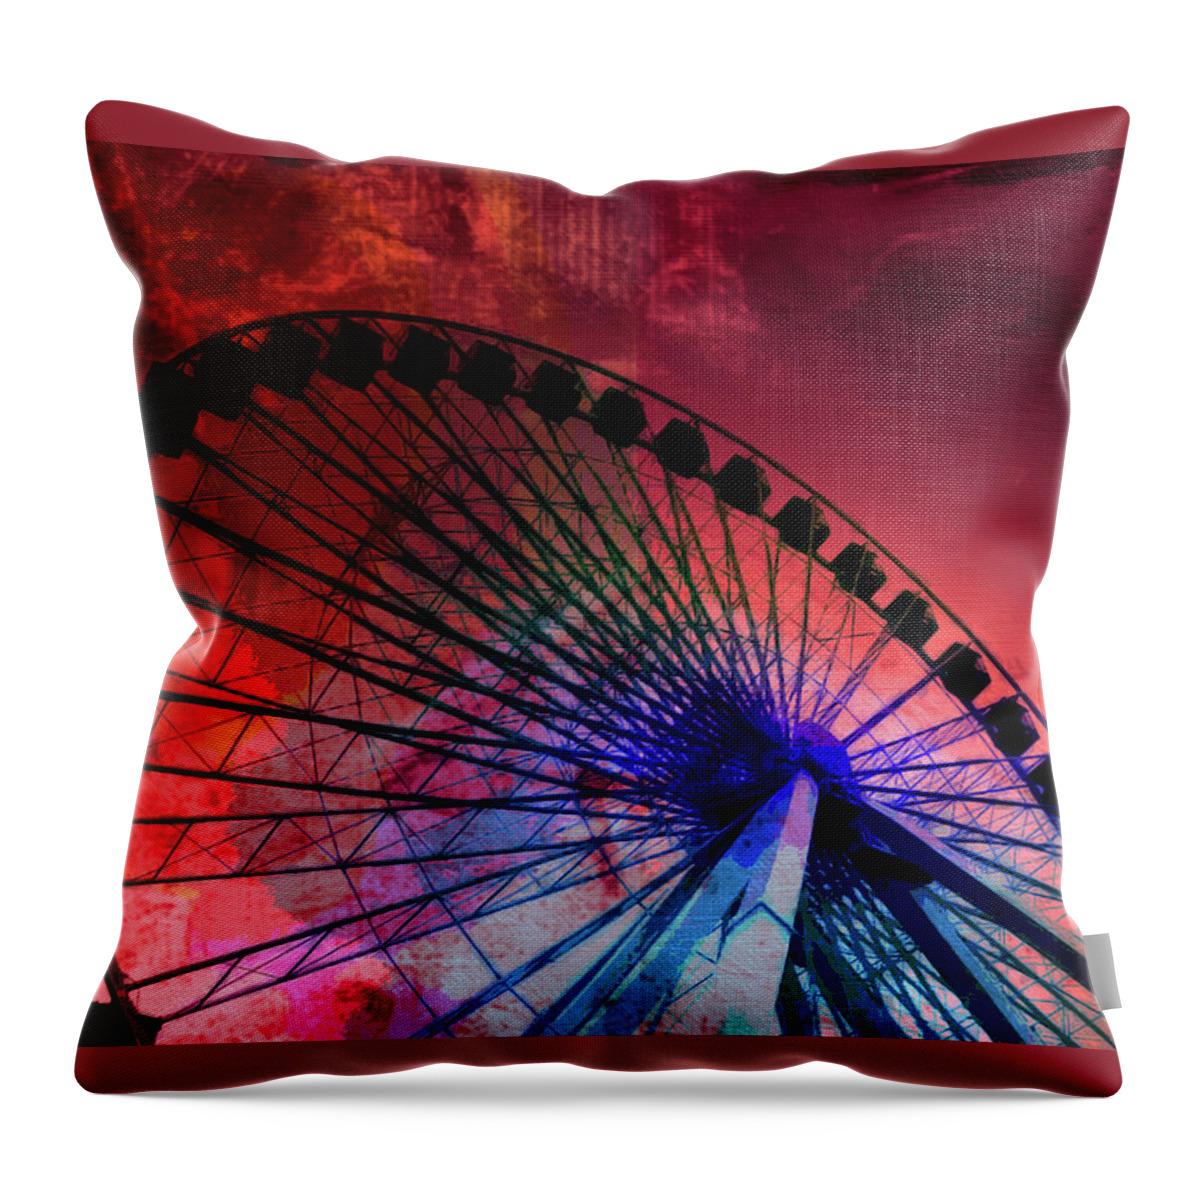 Louvre Throw Pillow featuring the mixed media Ferris 8 by Priscilla Huber